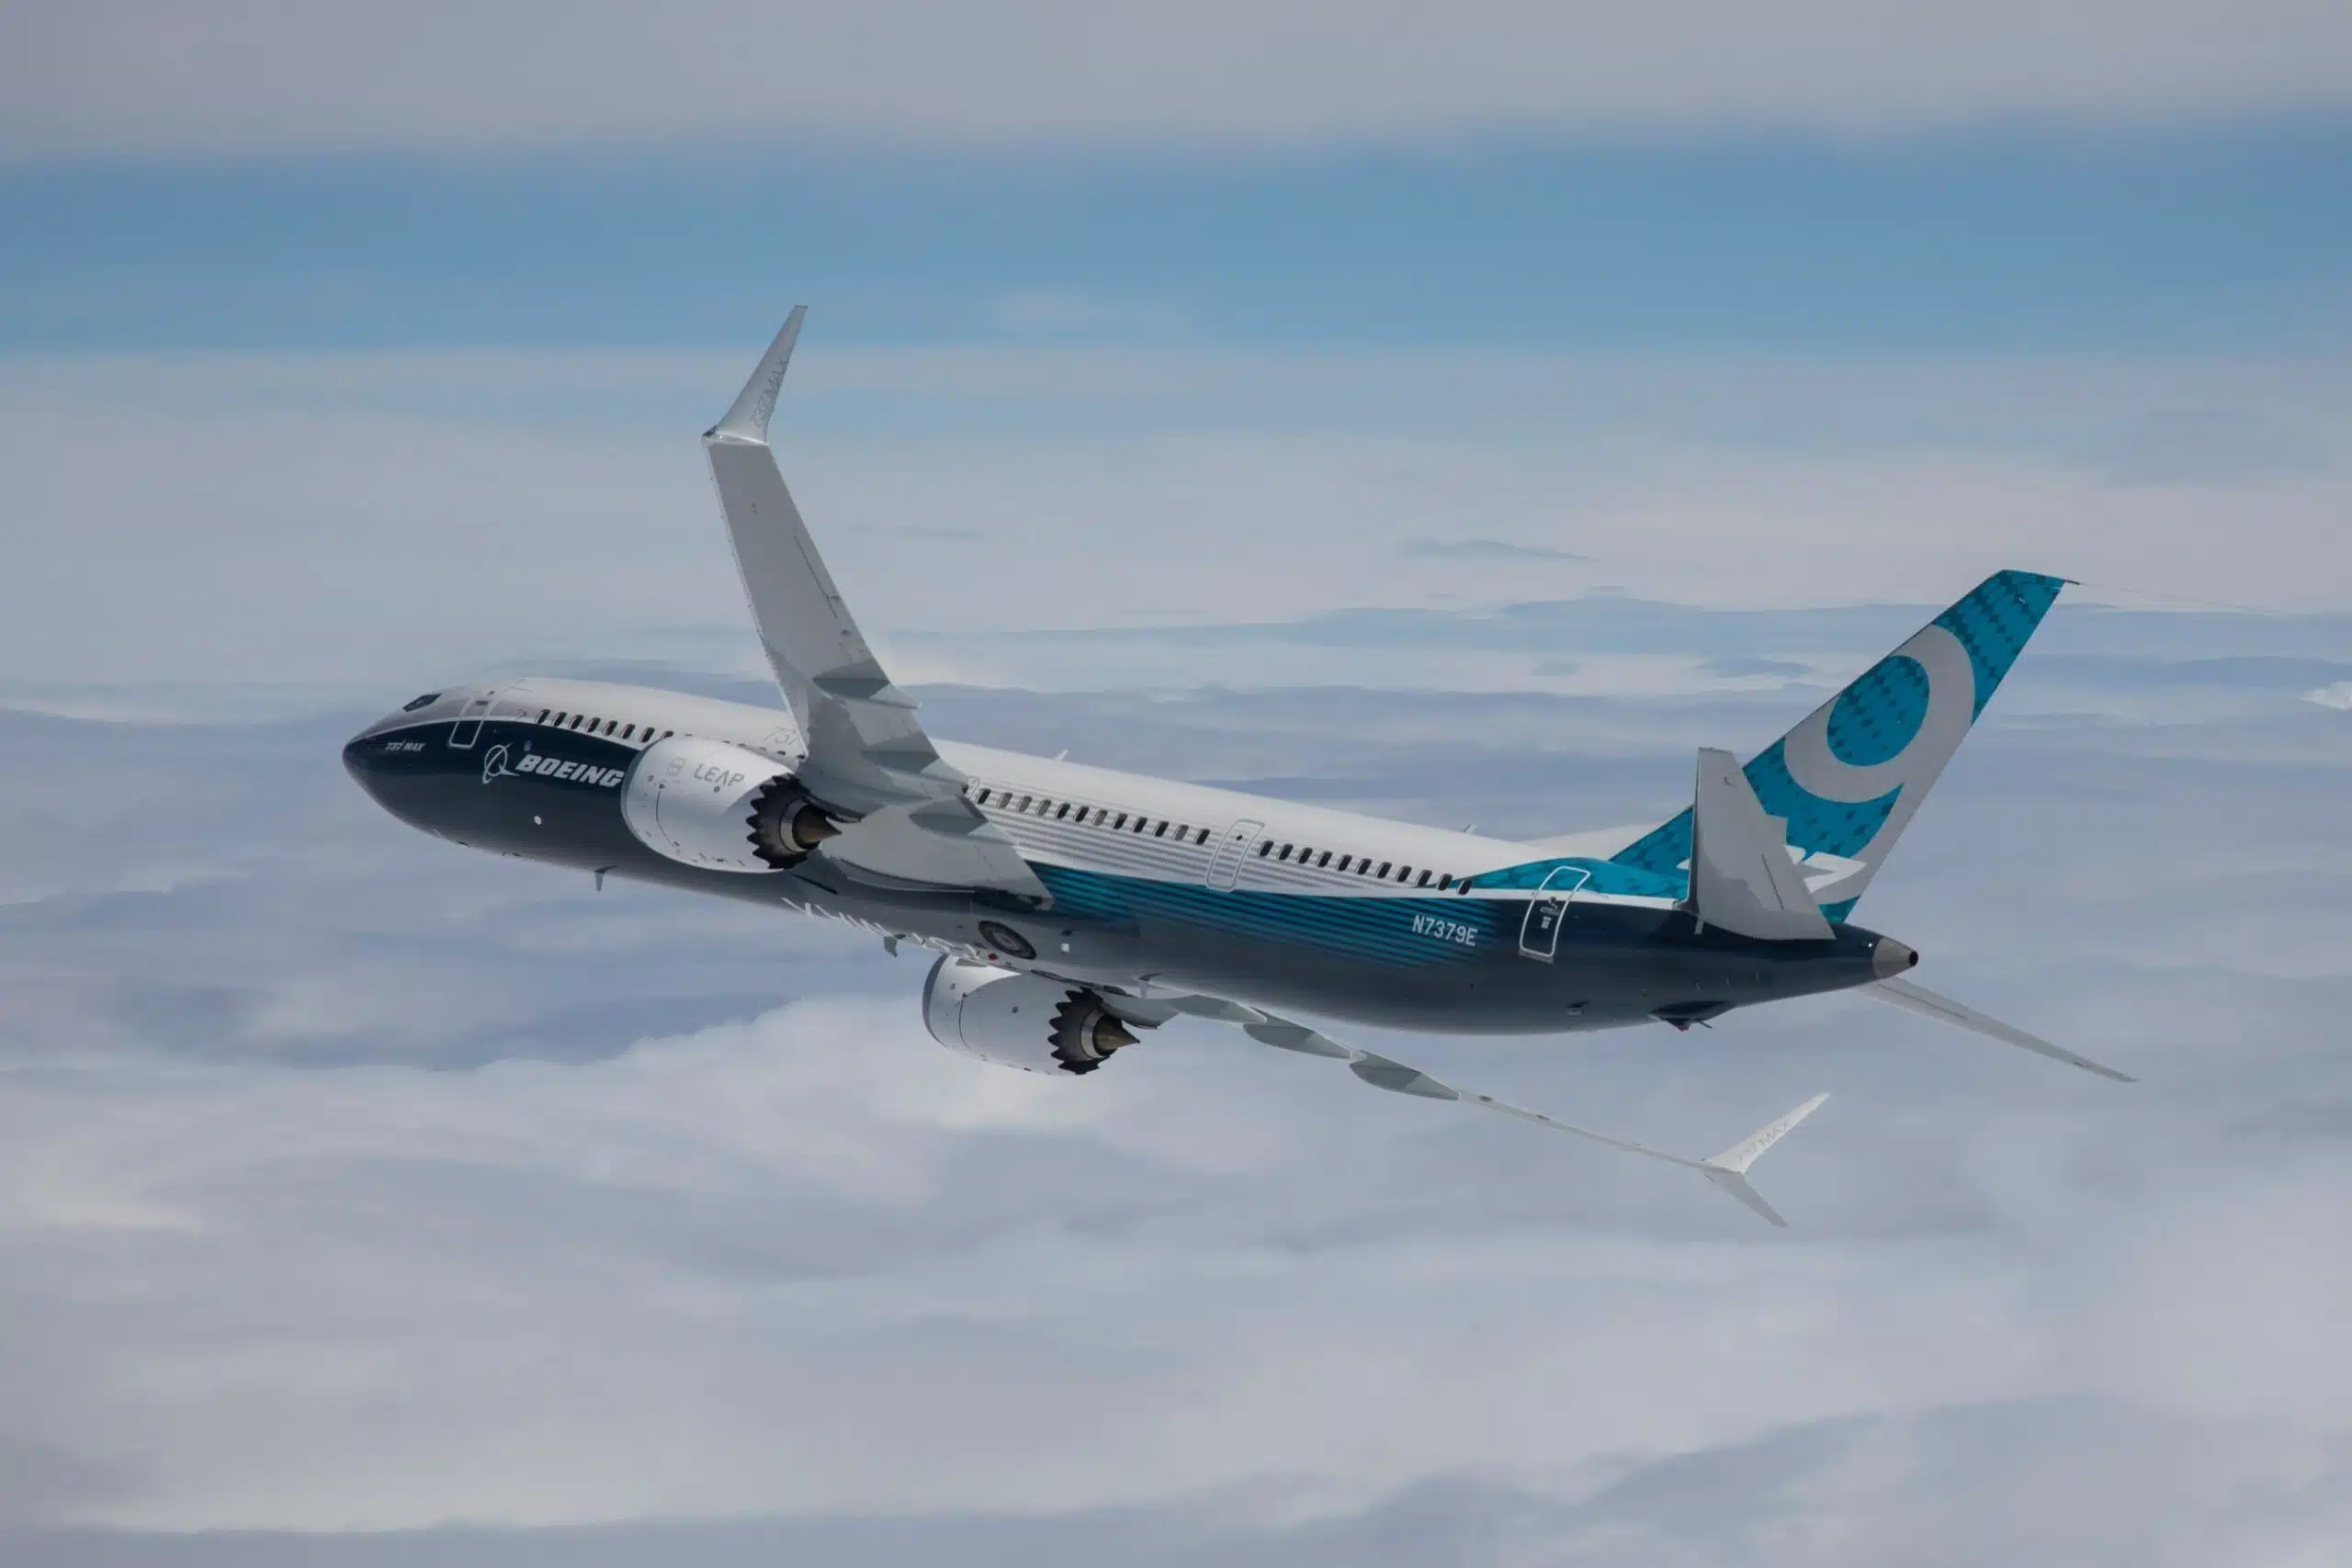 Boeing Q1 Sees Lower Deliveries Amid Production Issues